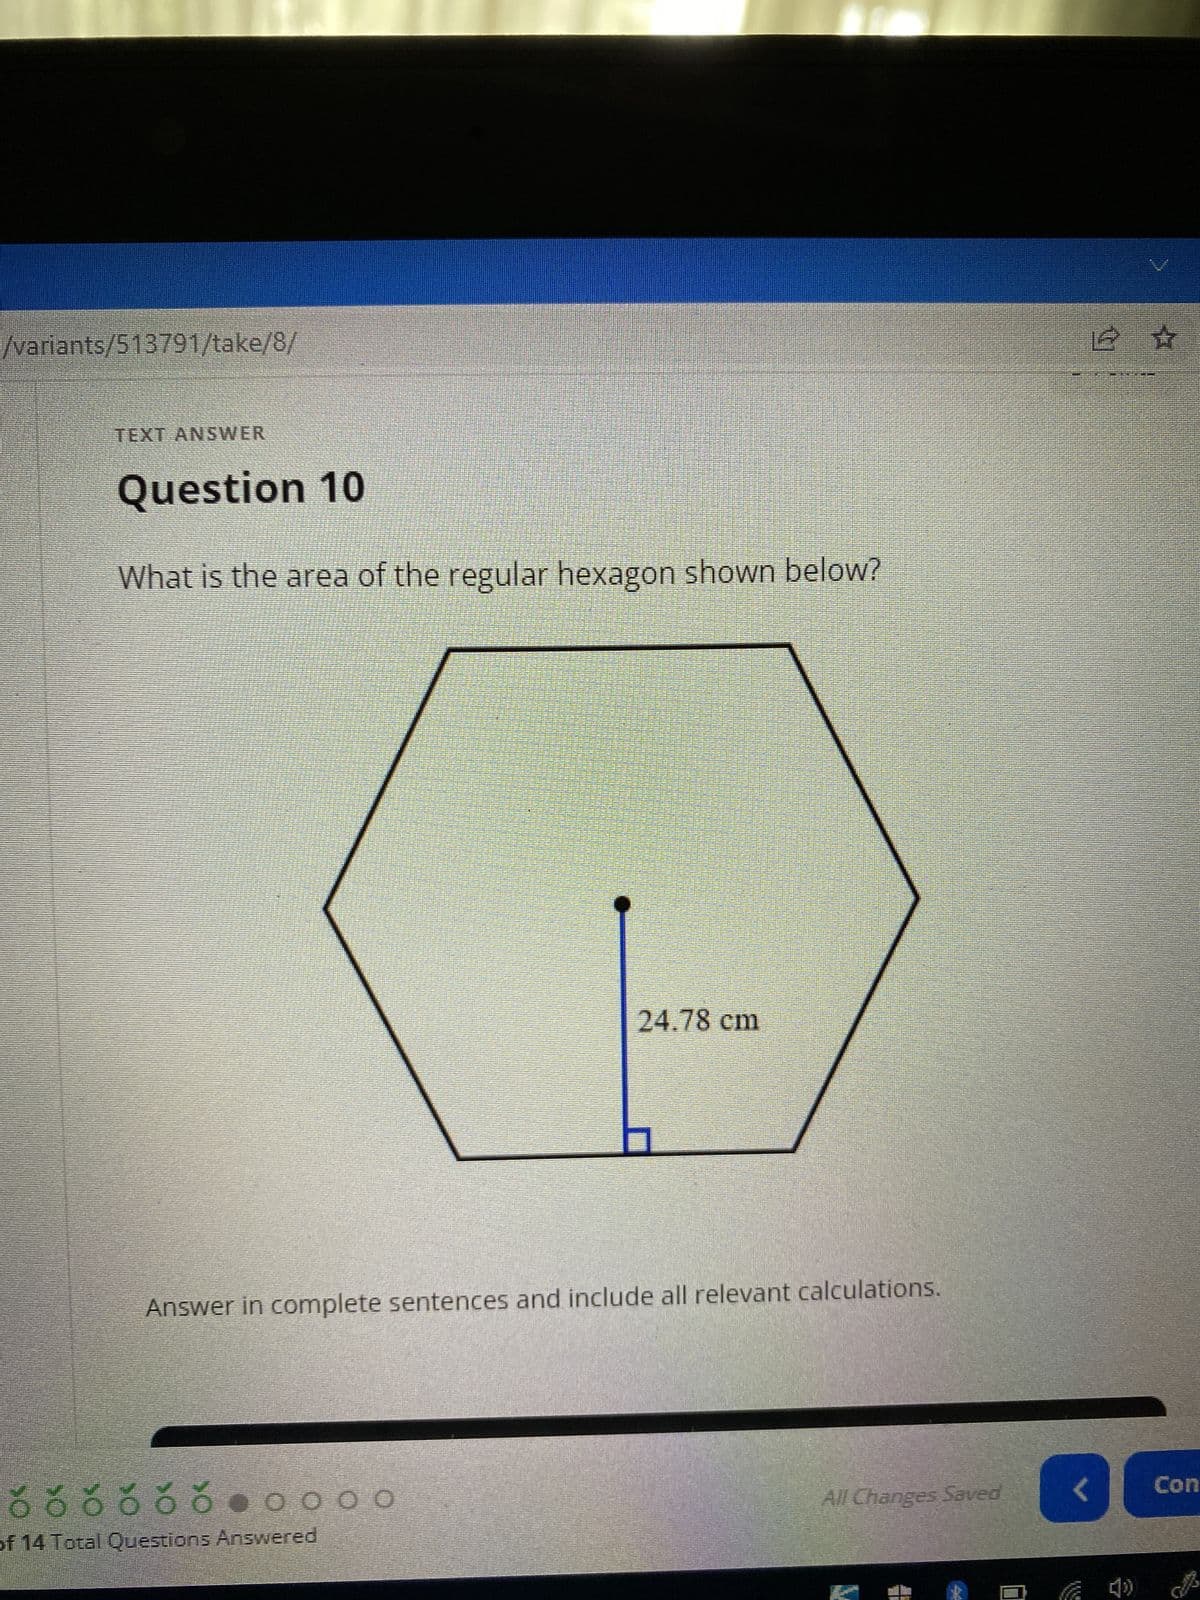 /variants/513791/take/8/
TEXT ANSWER
Question 10
What is the area of the regular hexagon shown below?
/
24.78 cm
Answer in complete sentences and include all relevant calculations.
All Changes Saved
ó ó ó ó ó ó ●0000
of 14 Total Questions Answered
12 ☆
<
Con
B